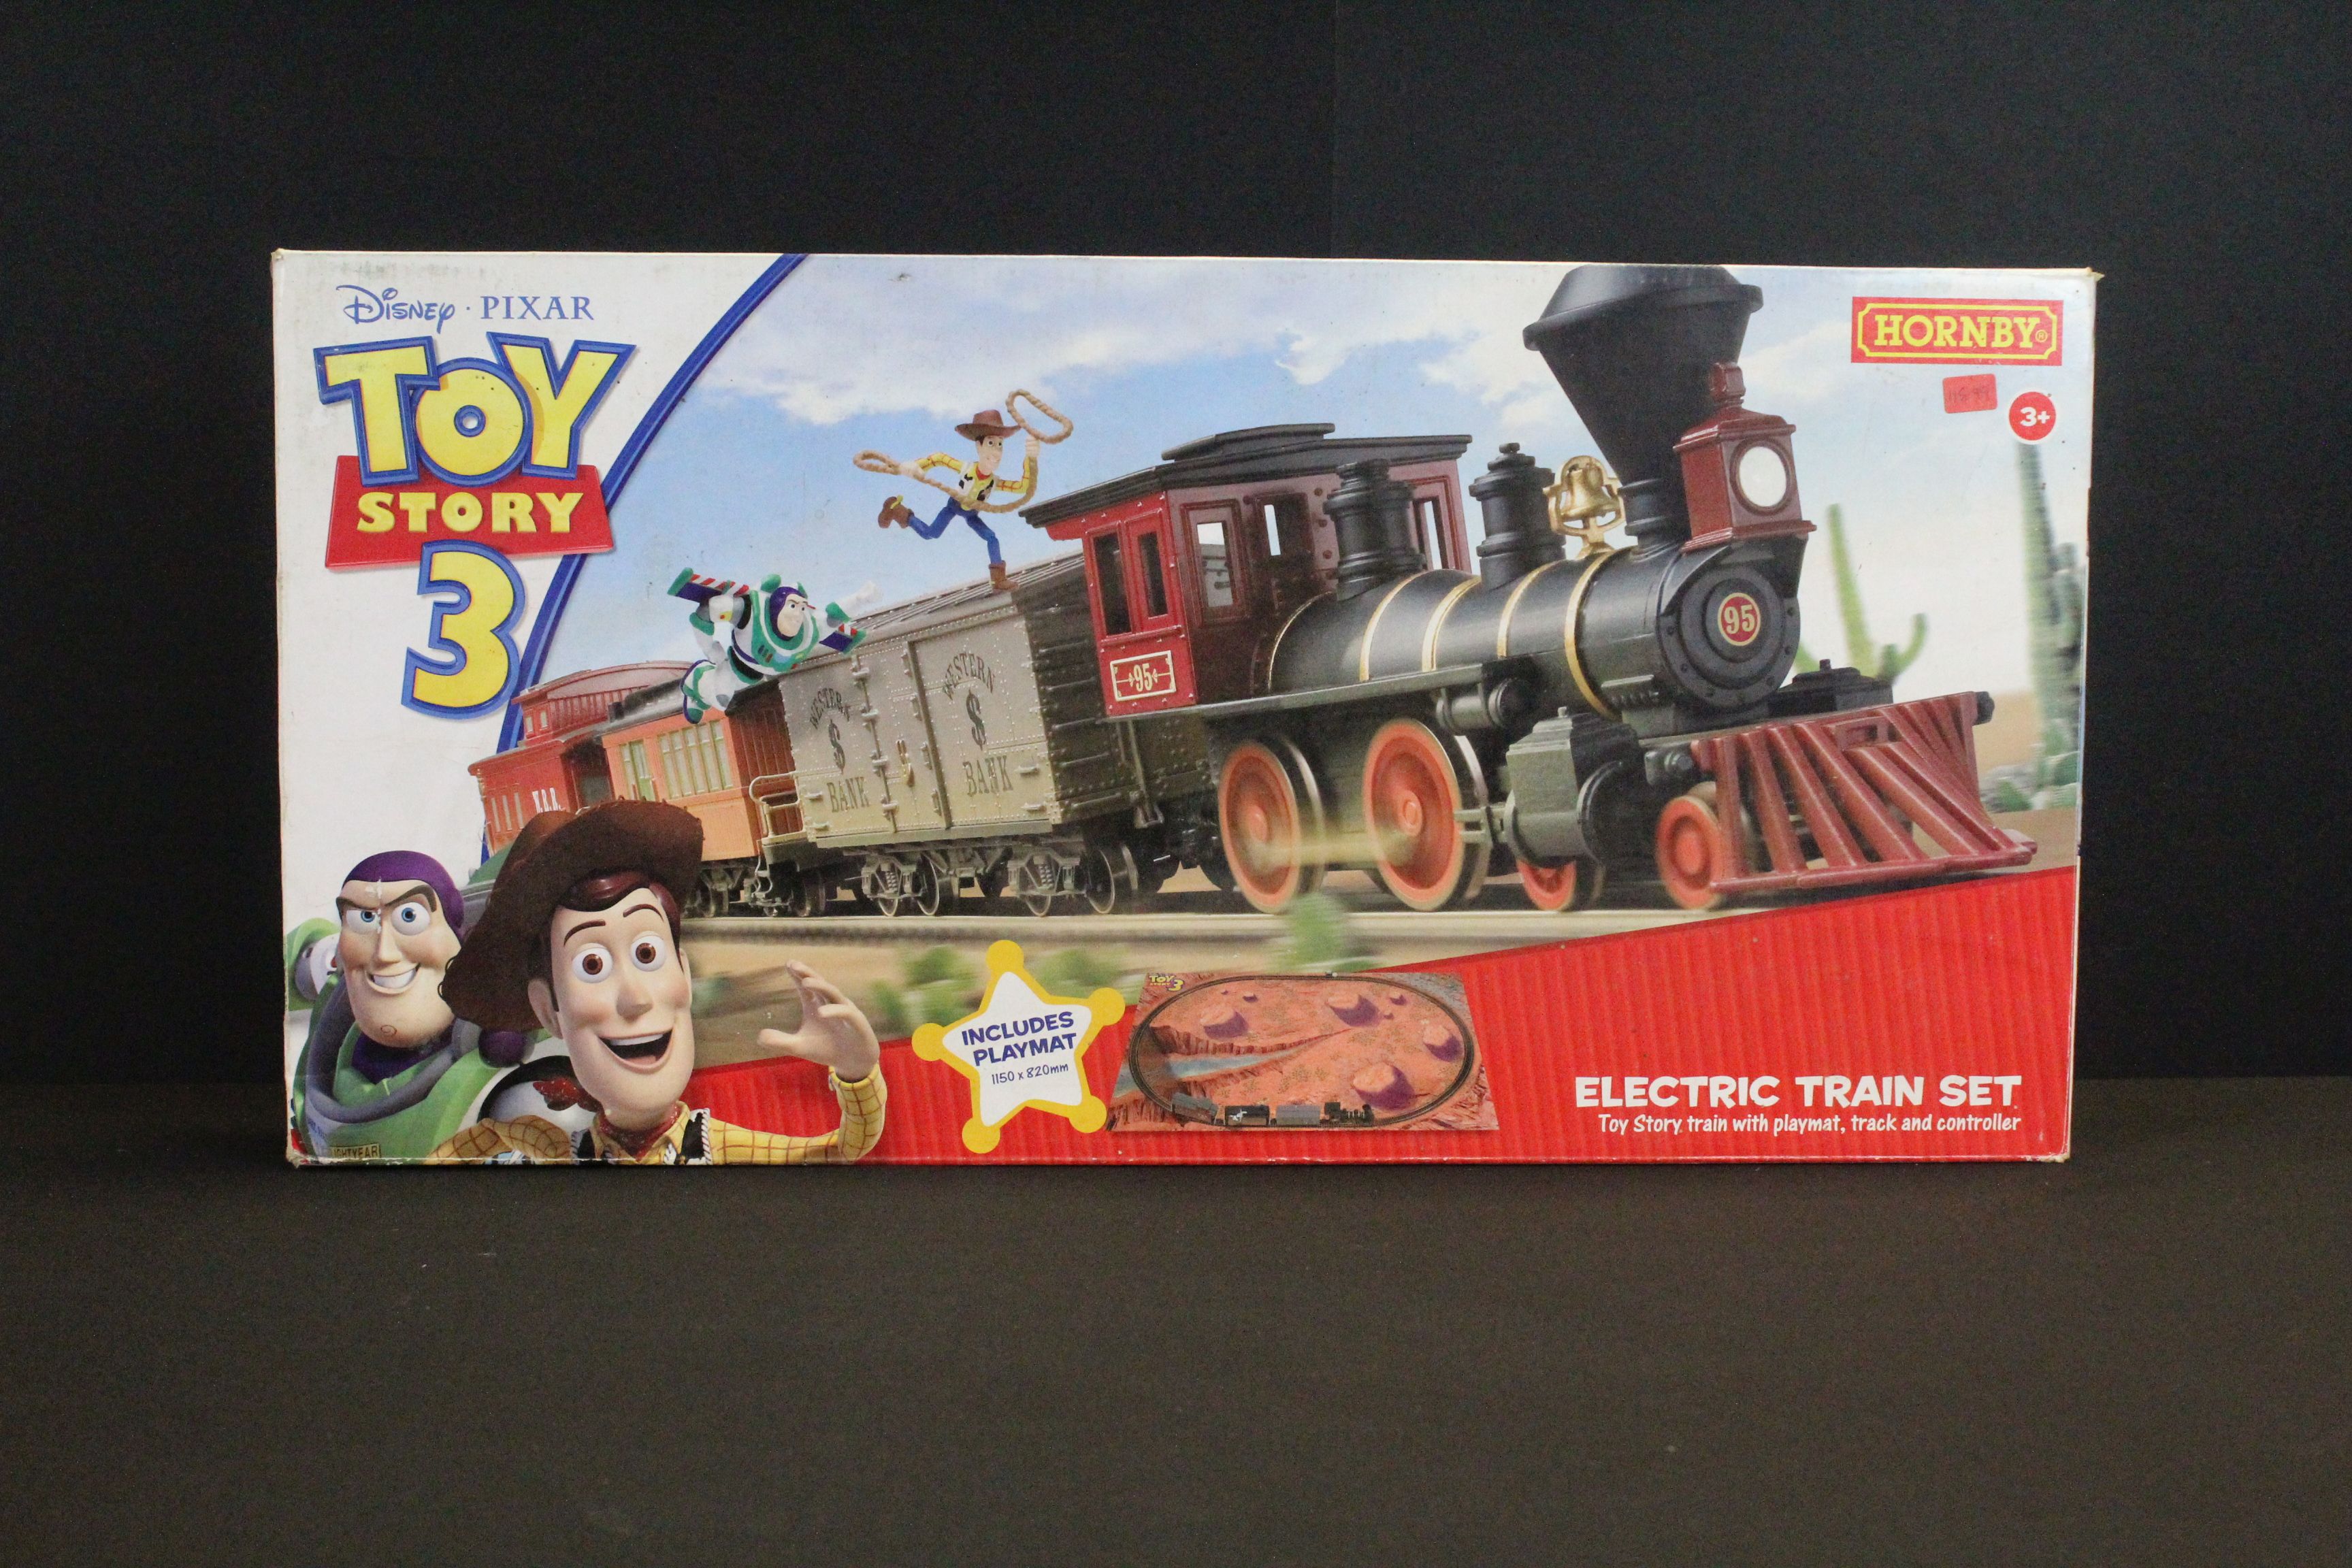 Boxed Hornby OO gauge R1149 Toy Story 3 train set, complete with locomotive, rolling stock etc